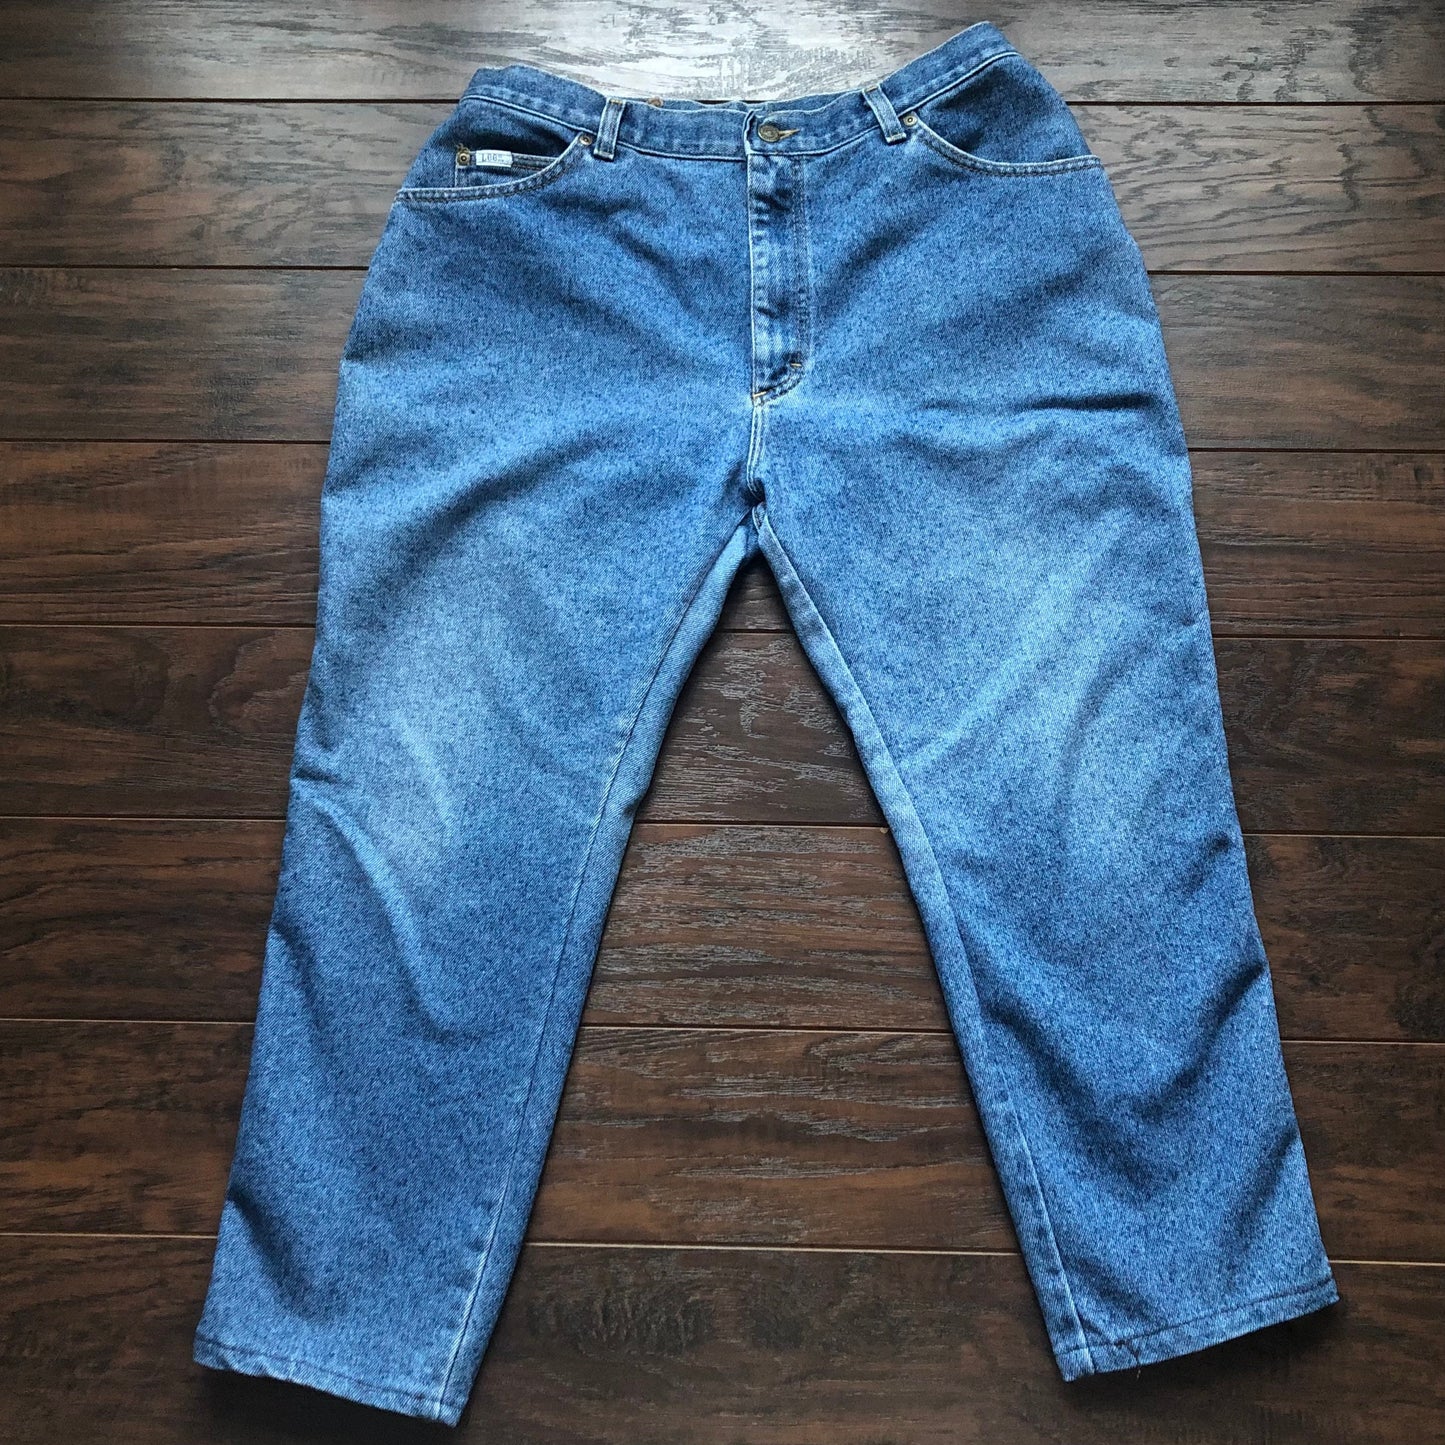 Vintage Women’s High Waisted Tapered Leg Lee Jeans